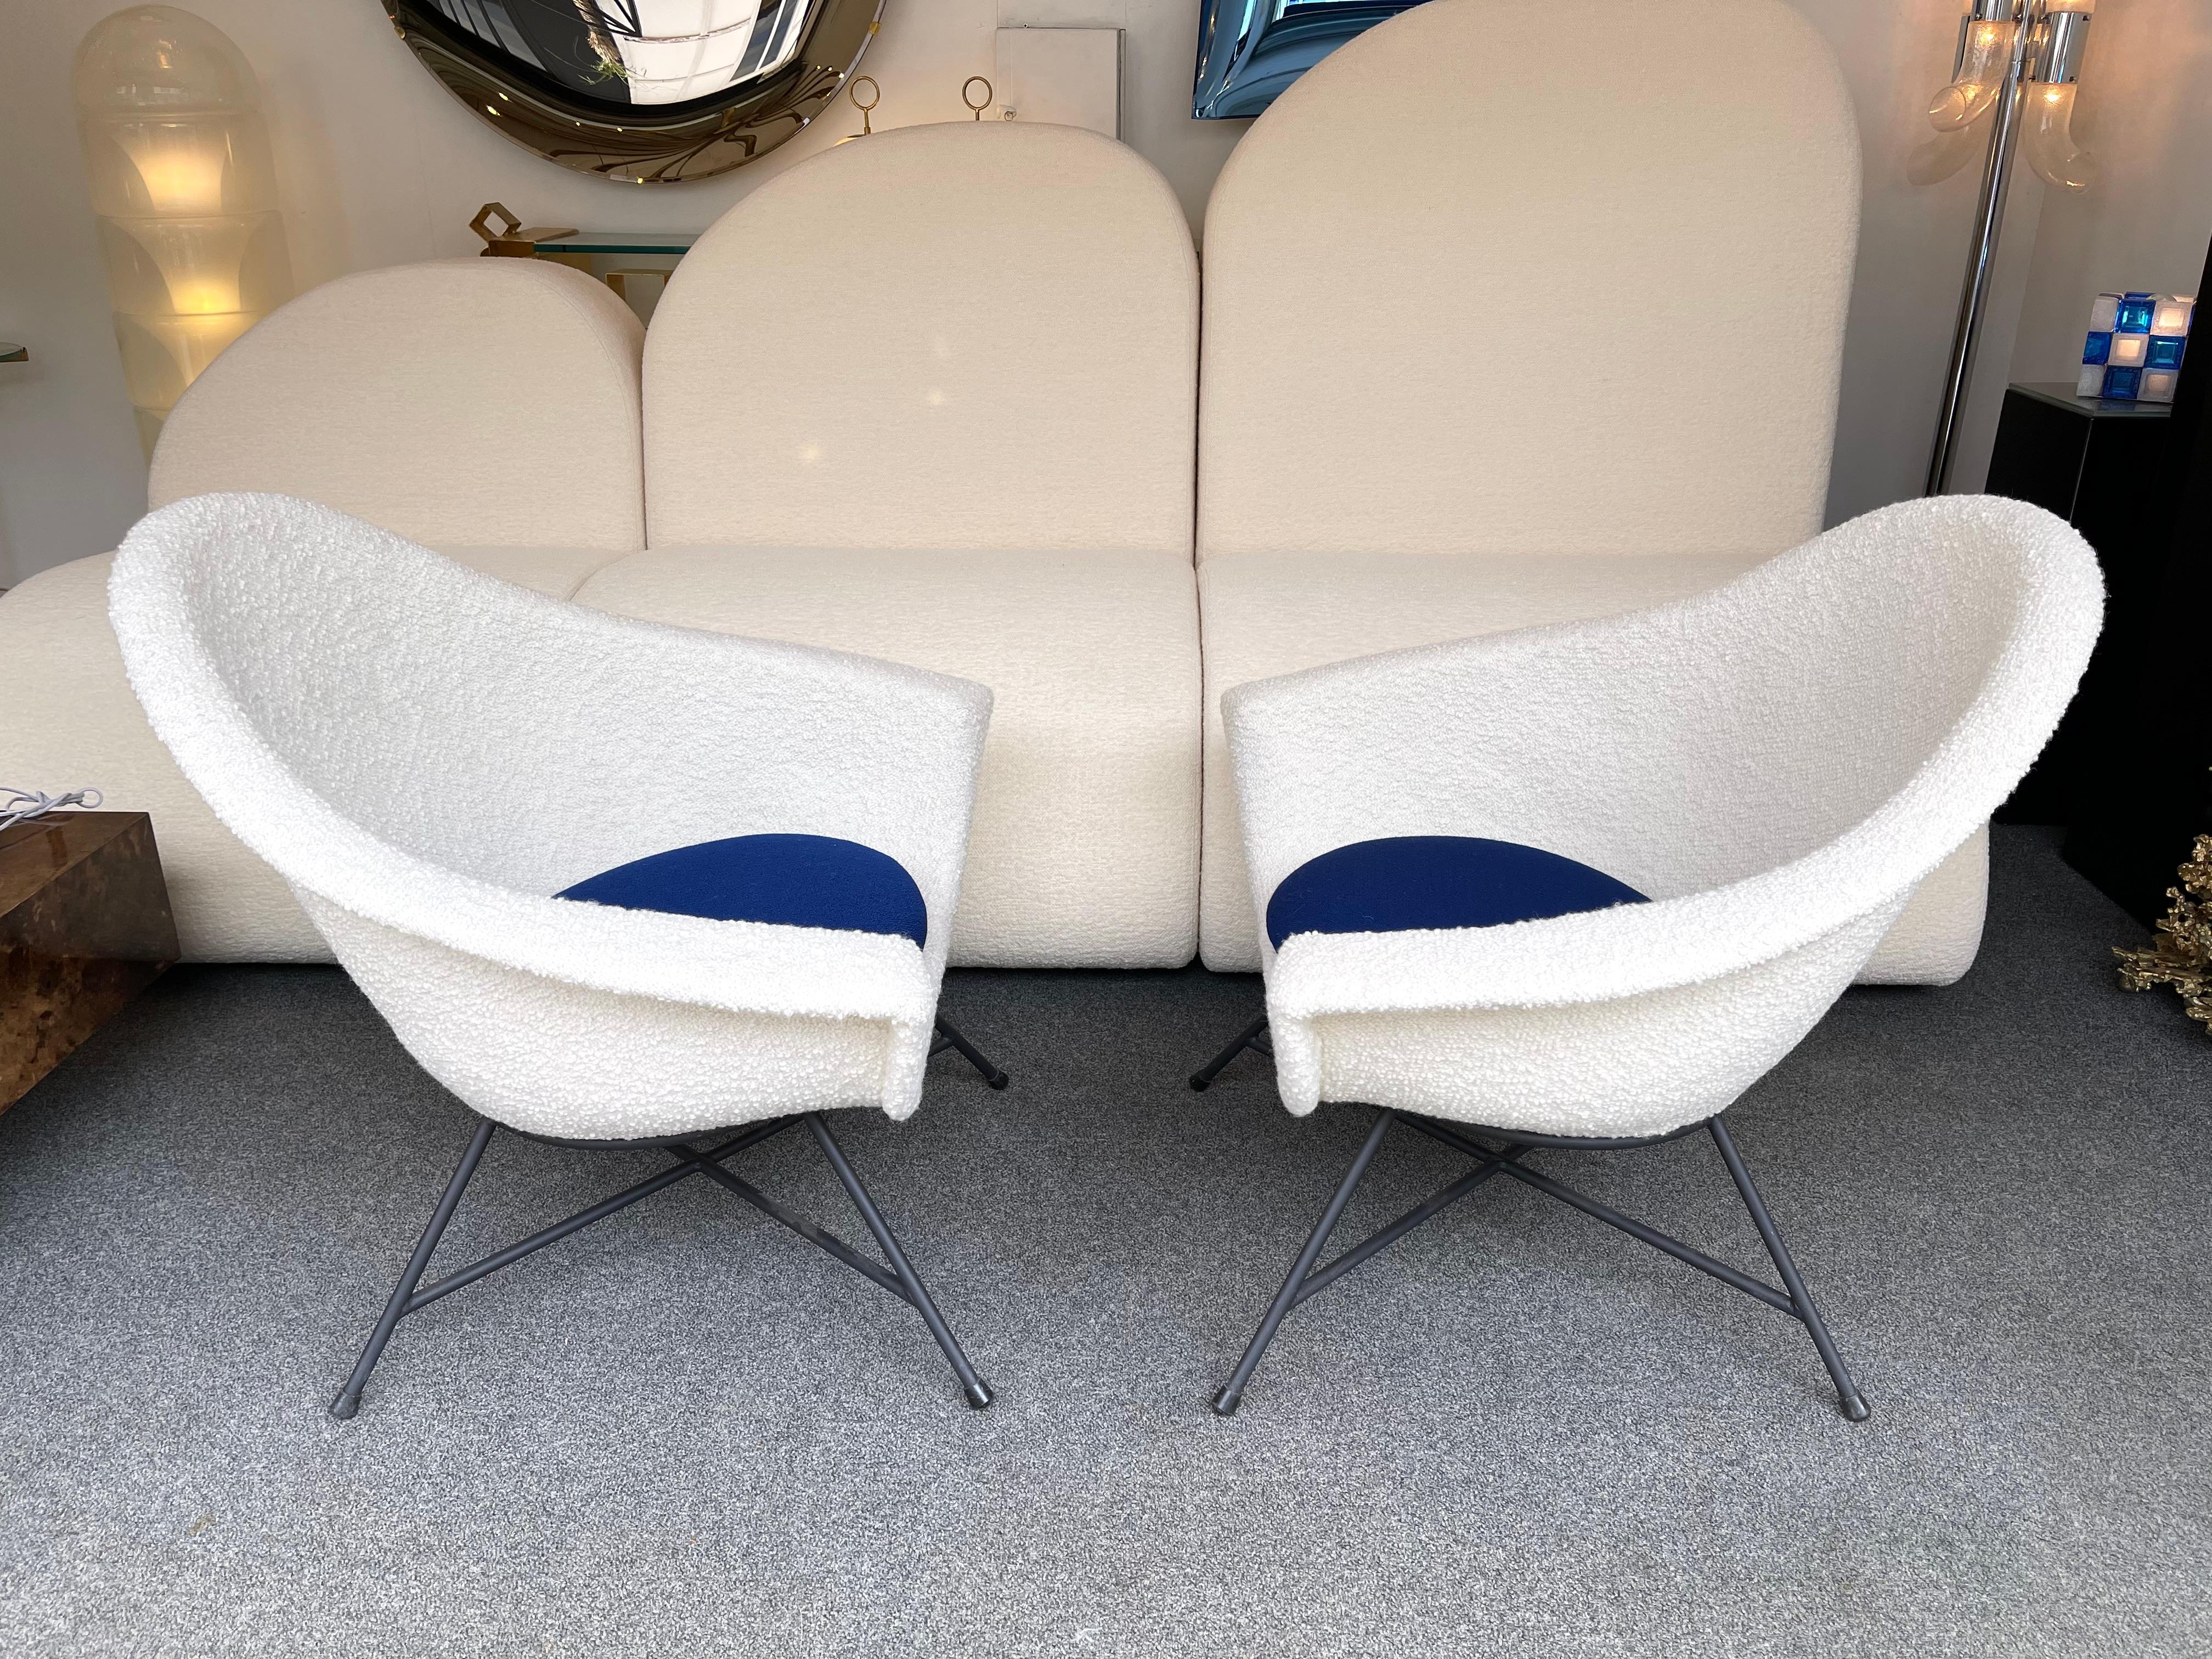 Pair of armchairs model 58, first edition with fiberglass shell and black lacquered metal feet by Genevieve Dangles and Christian Defrance for the editor Burov. New upholstery in bouclé fabric. Famous design like Charles Ramos, Claude Delor, Pierre